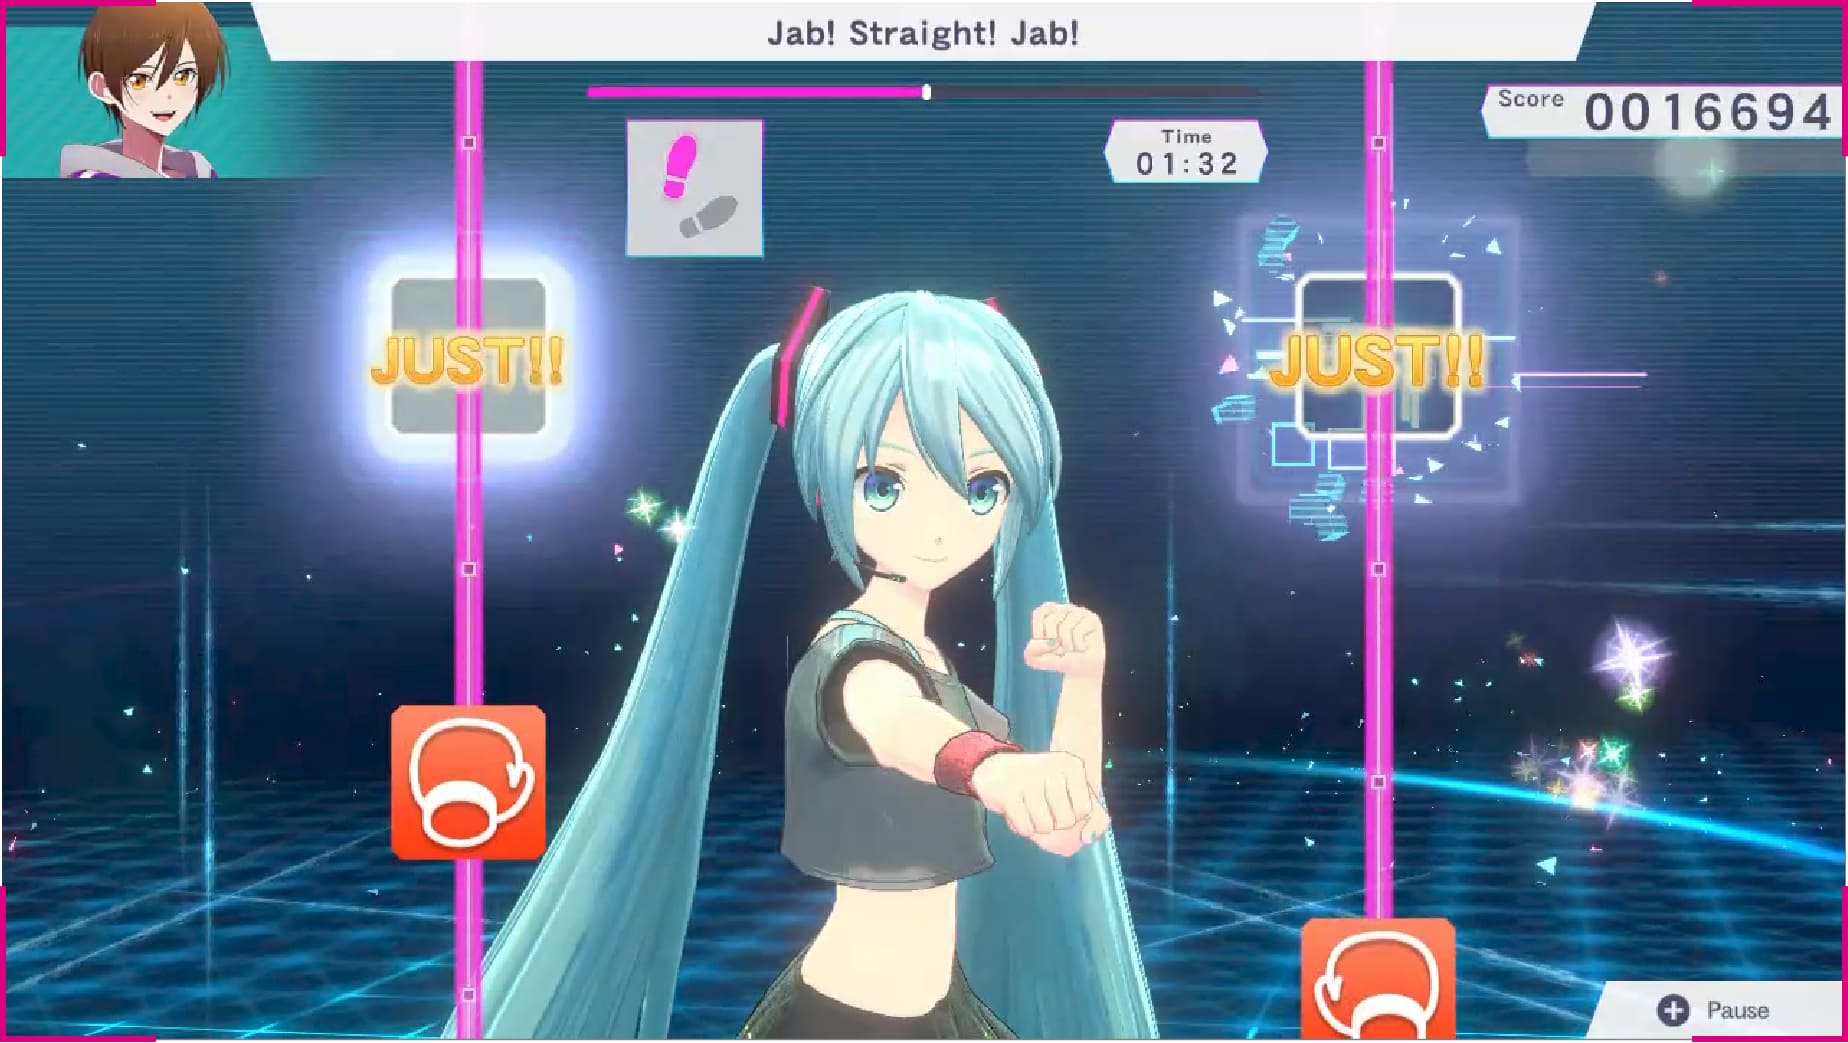 Work out with Miku using classic Fitness Boxing controls in "Exercise with Miku"!